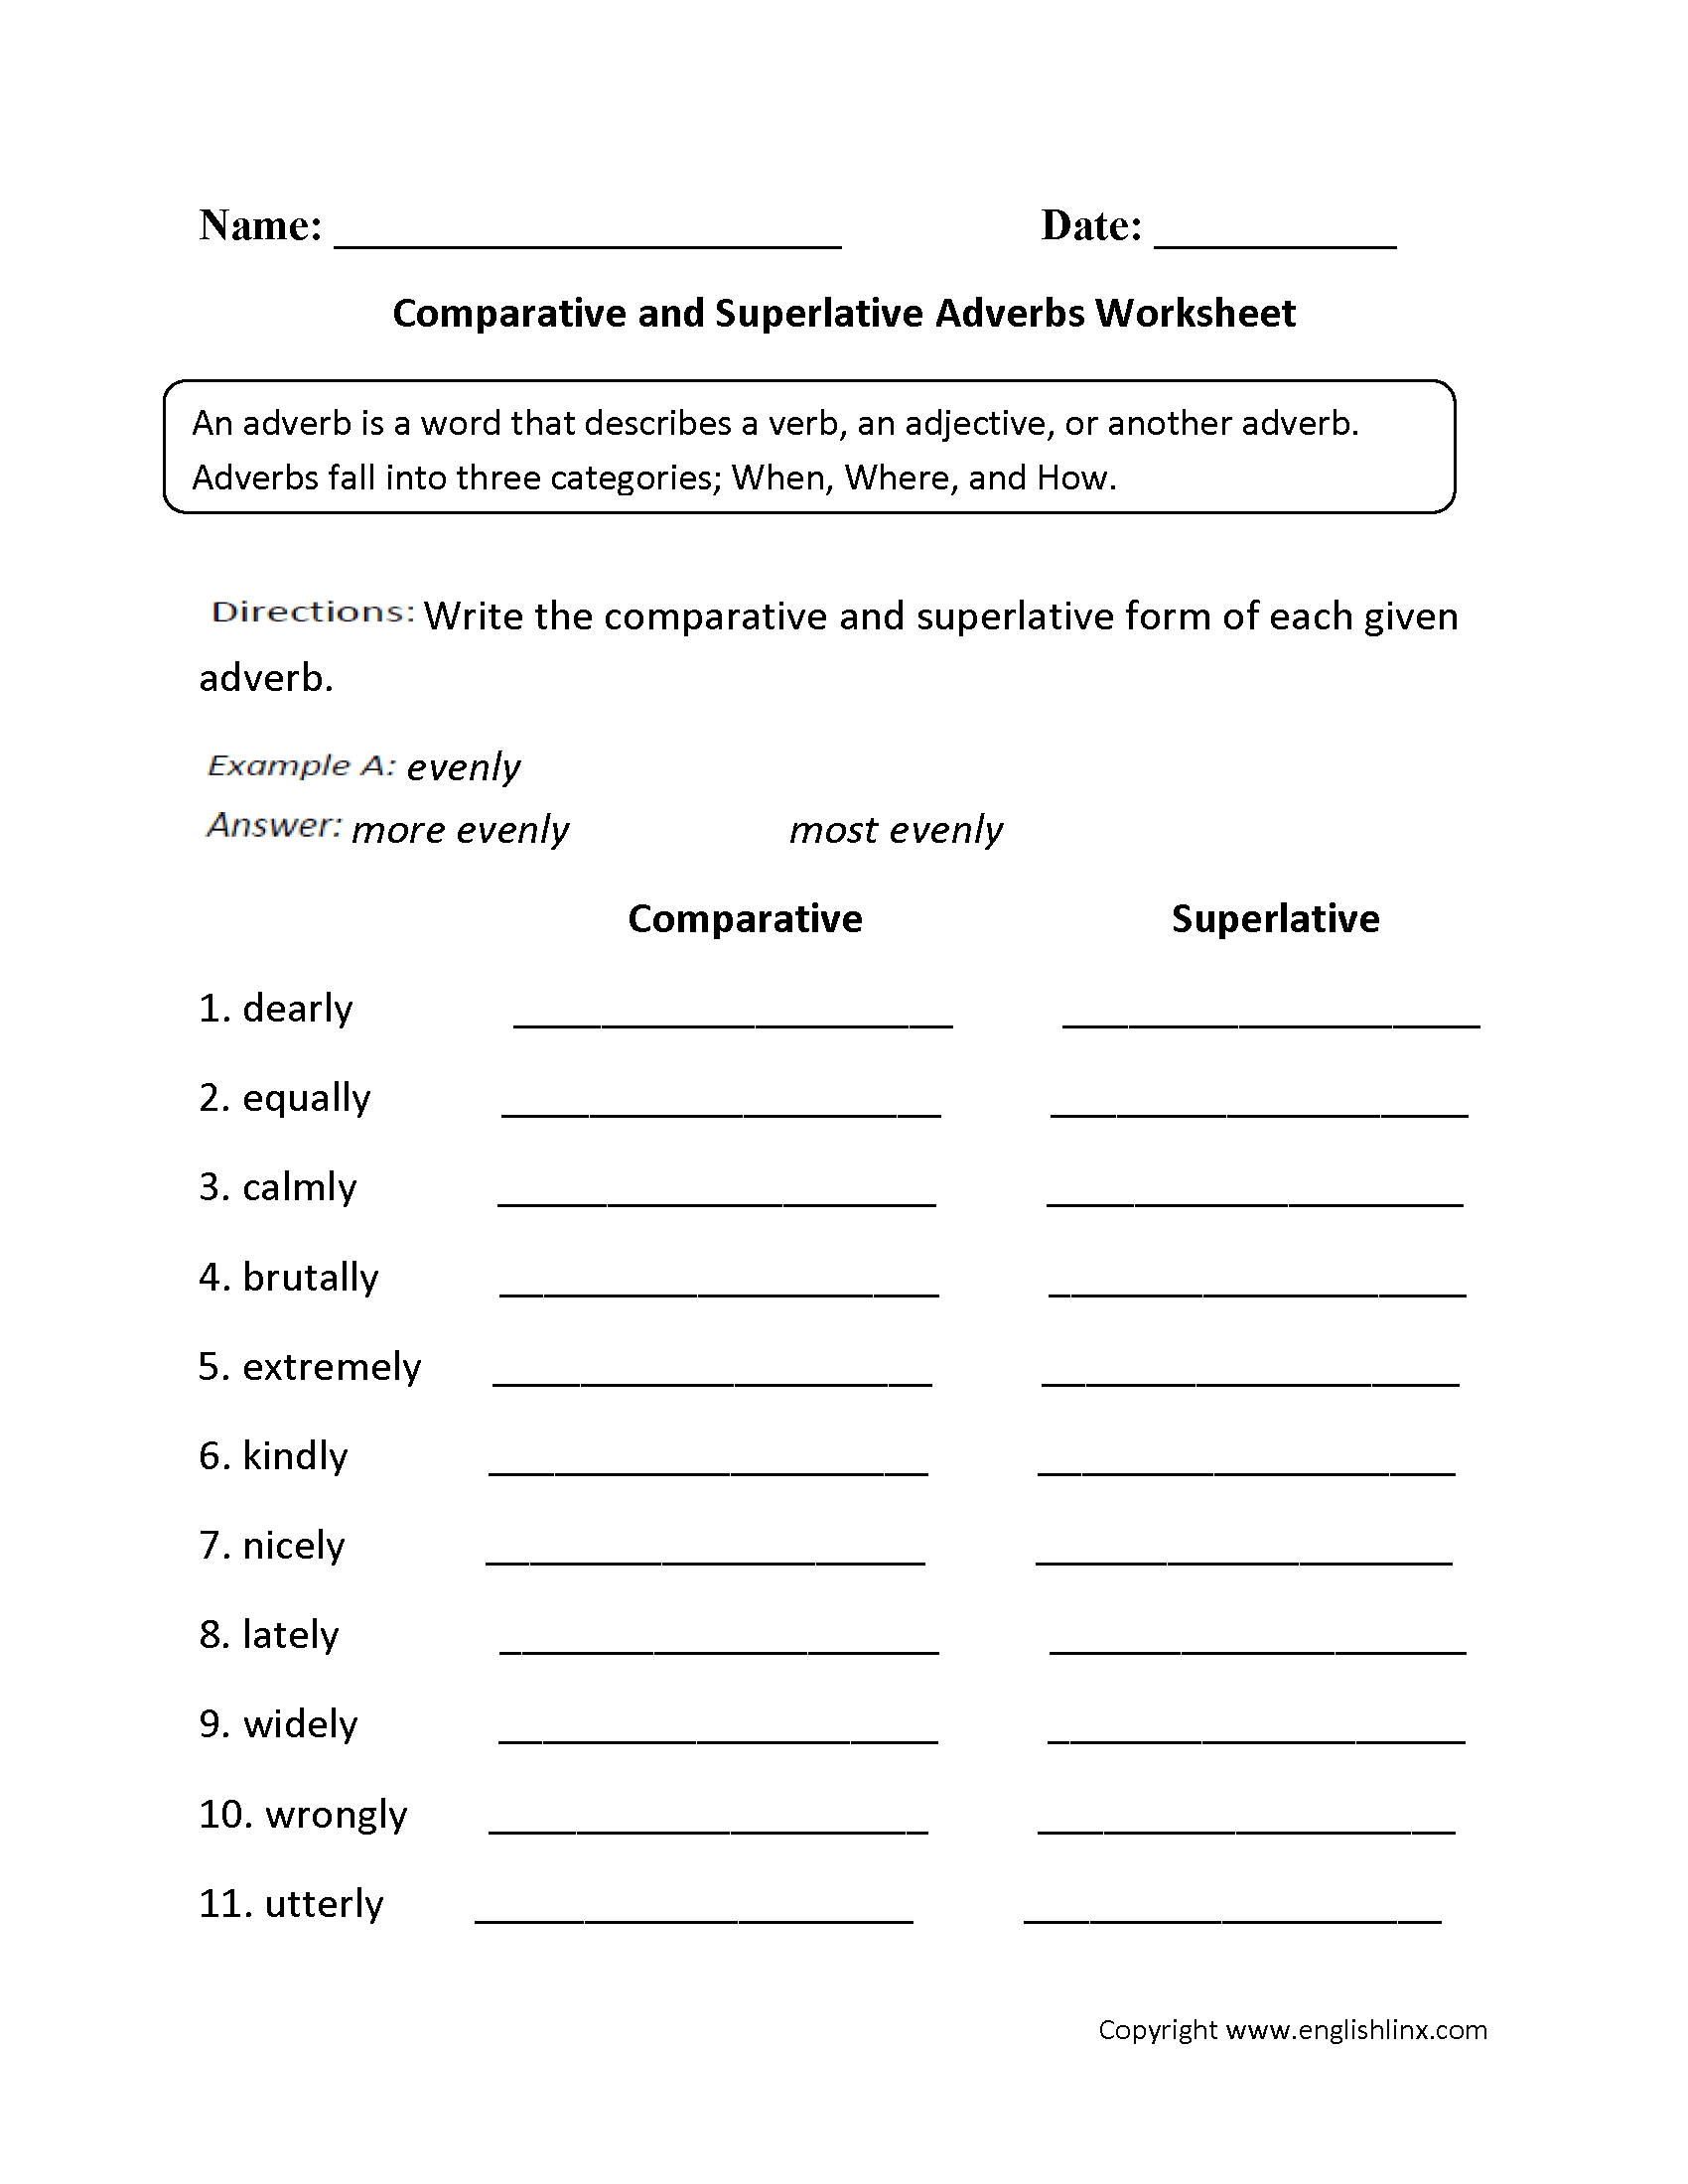 Comparative and Superlative Adverb Worksheets